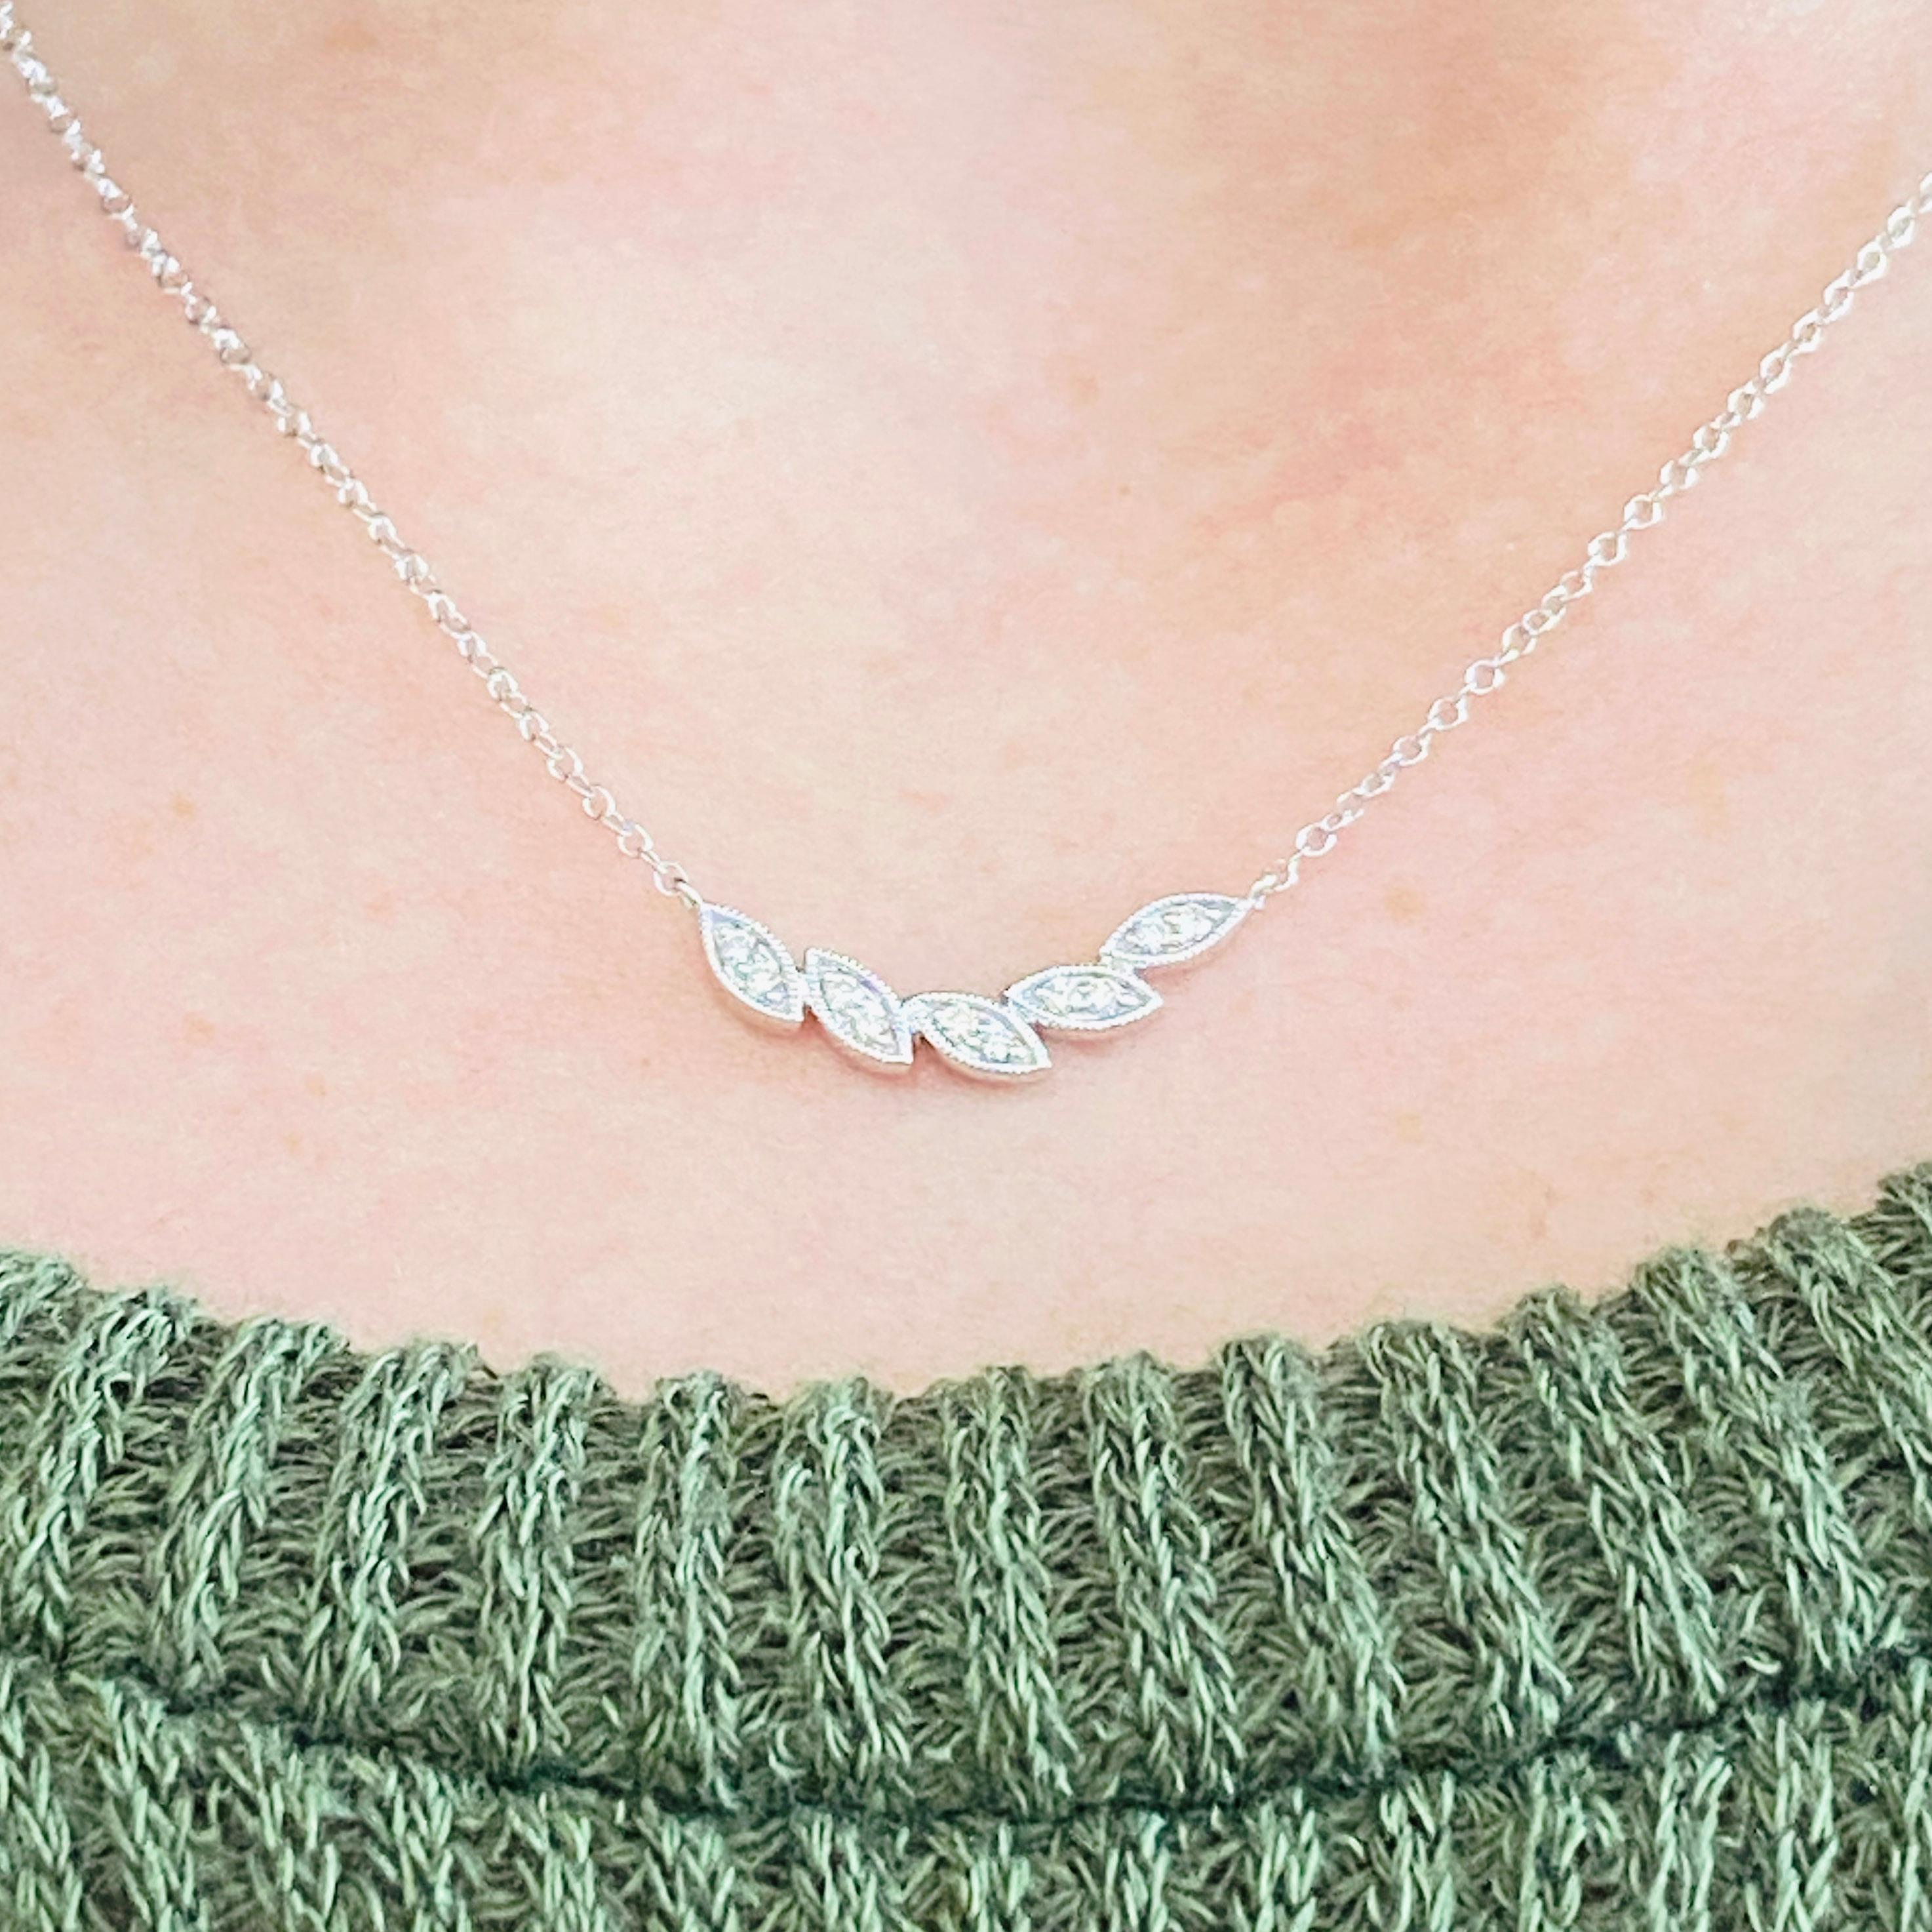 This gorgeous 14k white gold leaf curved bar necklace dripping with diamonds is the perfect mix between classic and trendy! This necklace is very fashionable and can add a touch of style to any outfit, yet it is also classy enough to pair easily